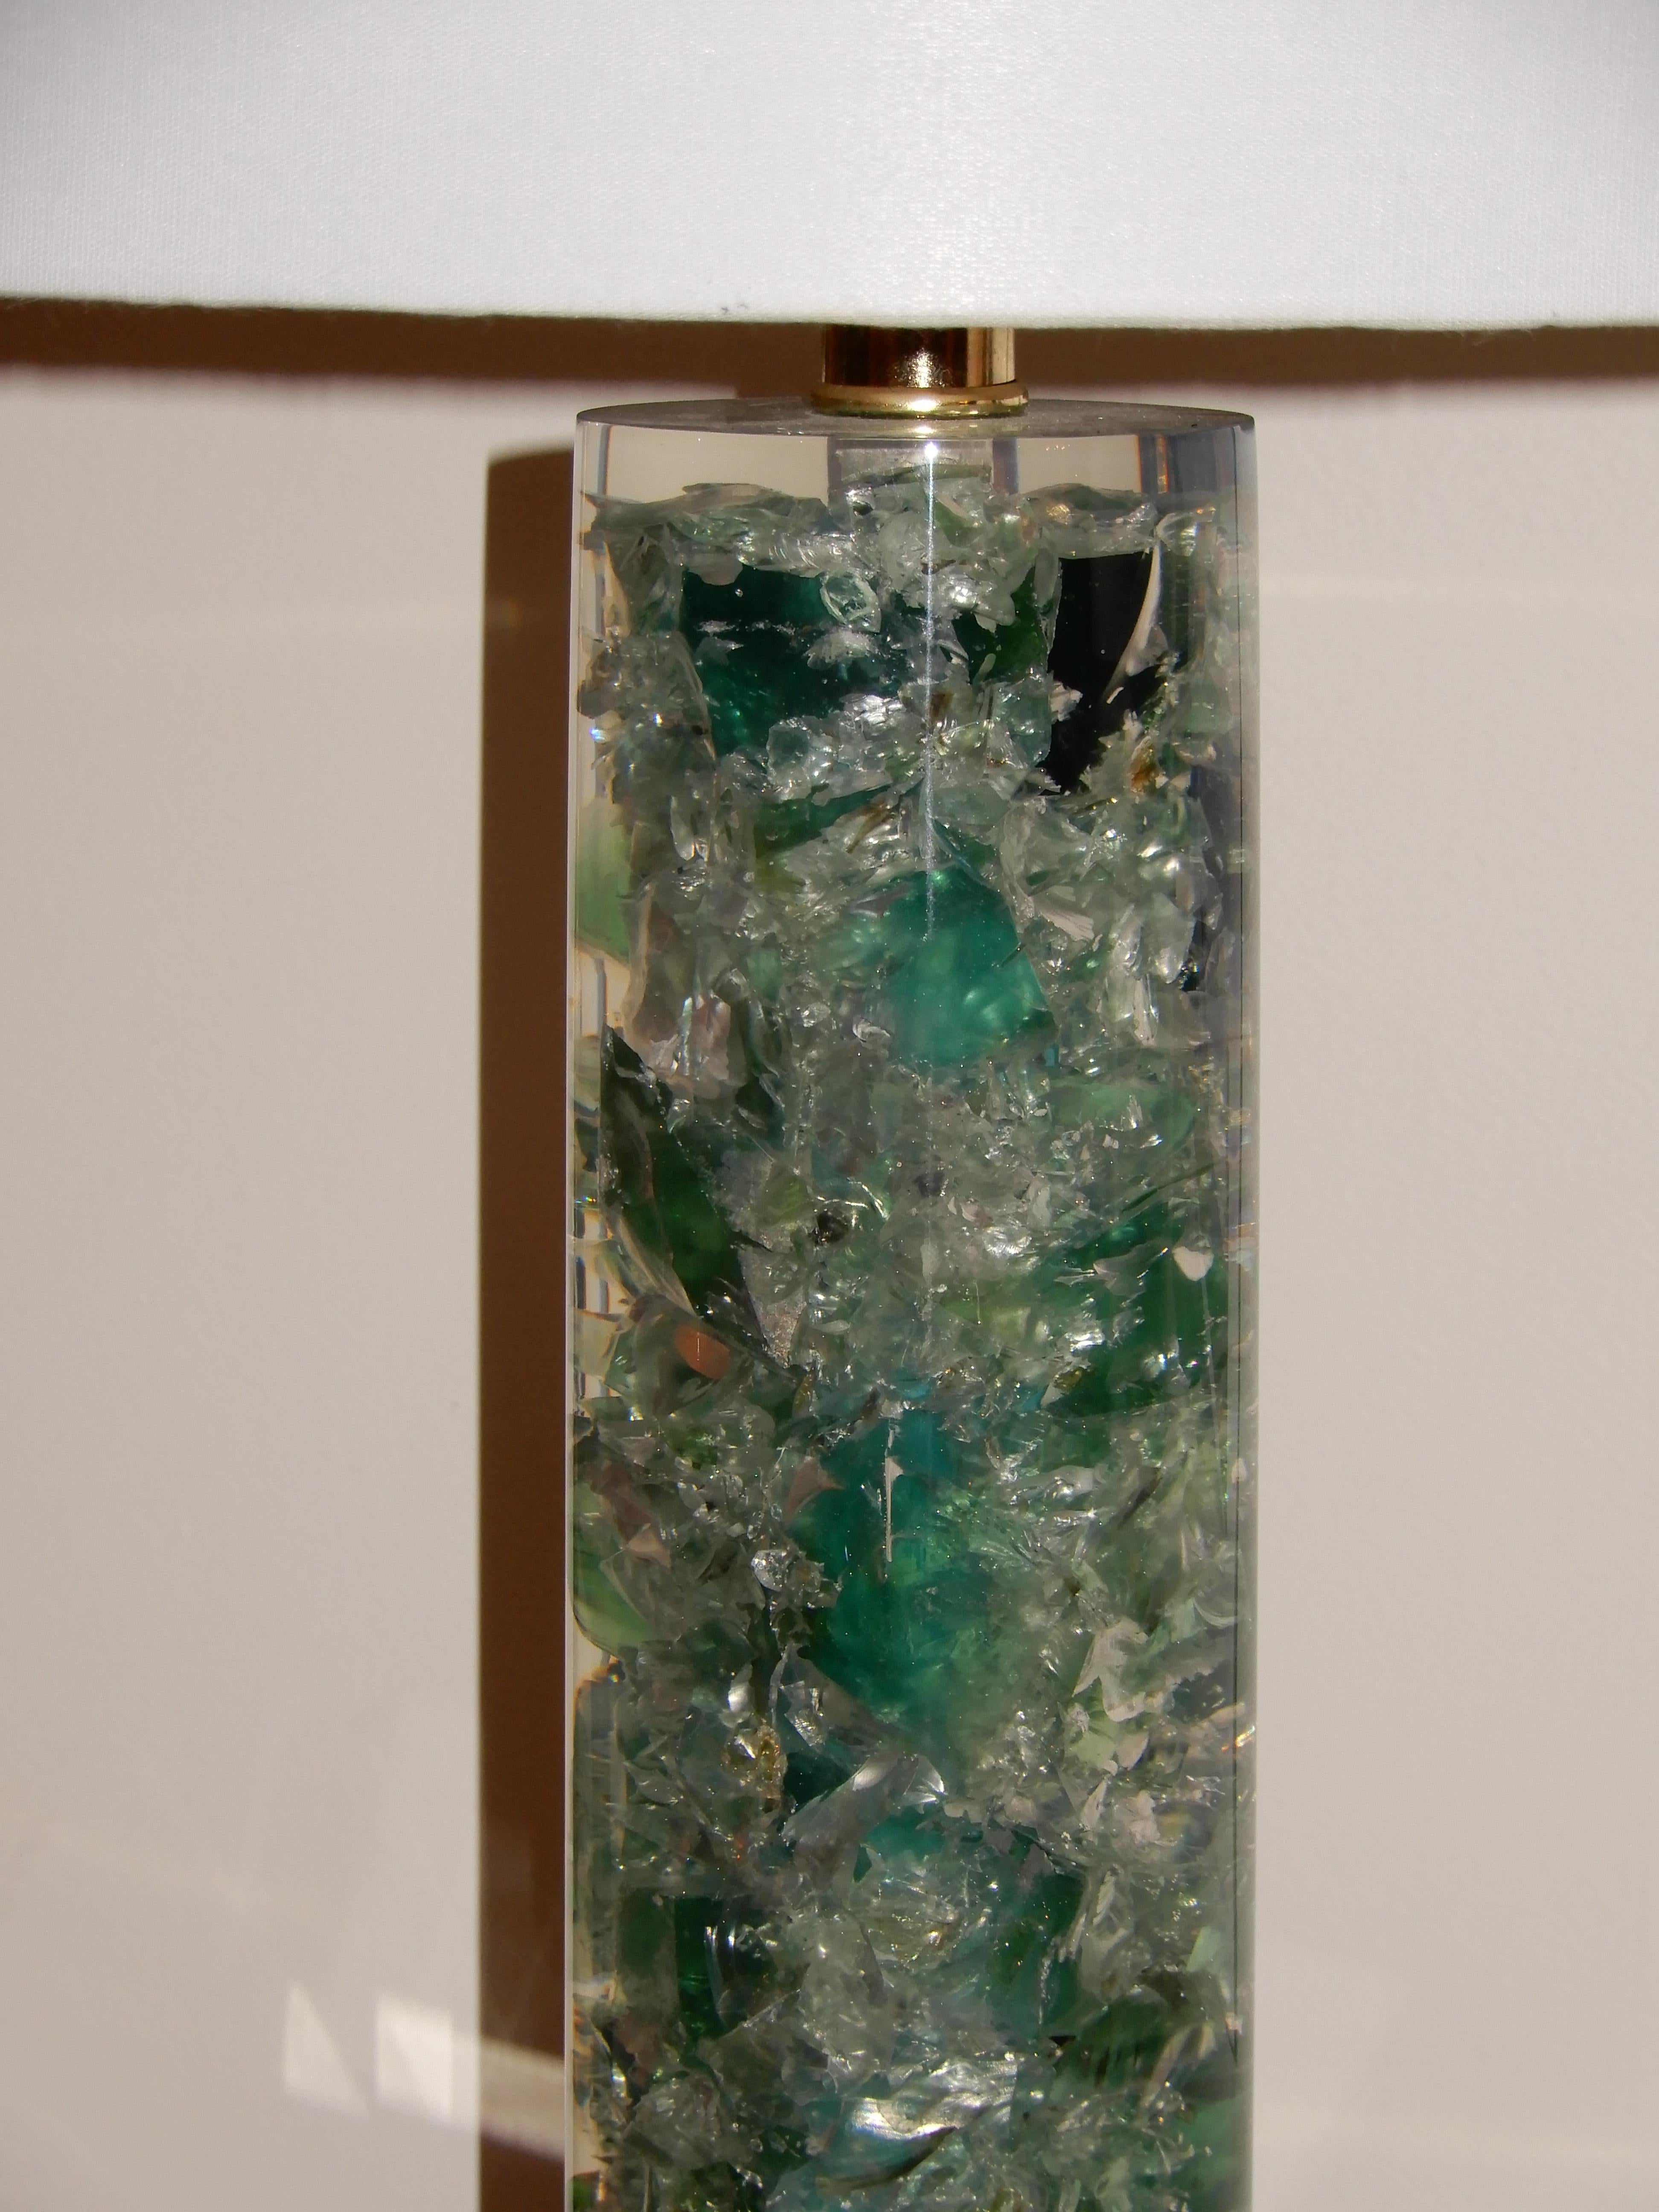 A lovely Lucite and crushed sea glass table lamp, blues, greens, turquoise, three-way switch up to 150 watts.
Lucite base and cylinder, brass warm fittings. The lamp measures 28 inches from the base to the top of the shade and 22 inches to the